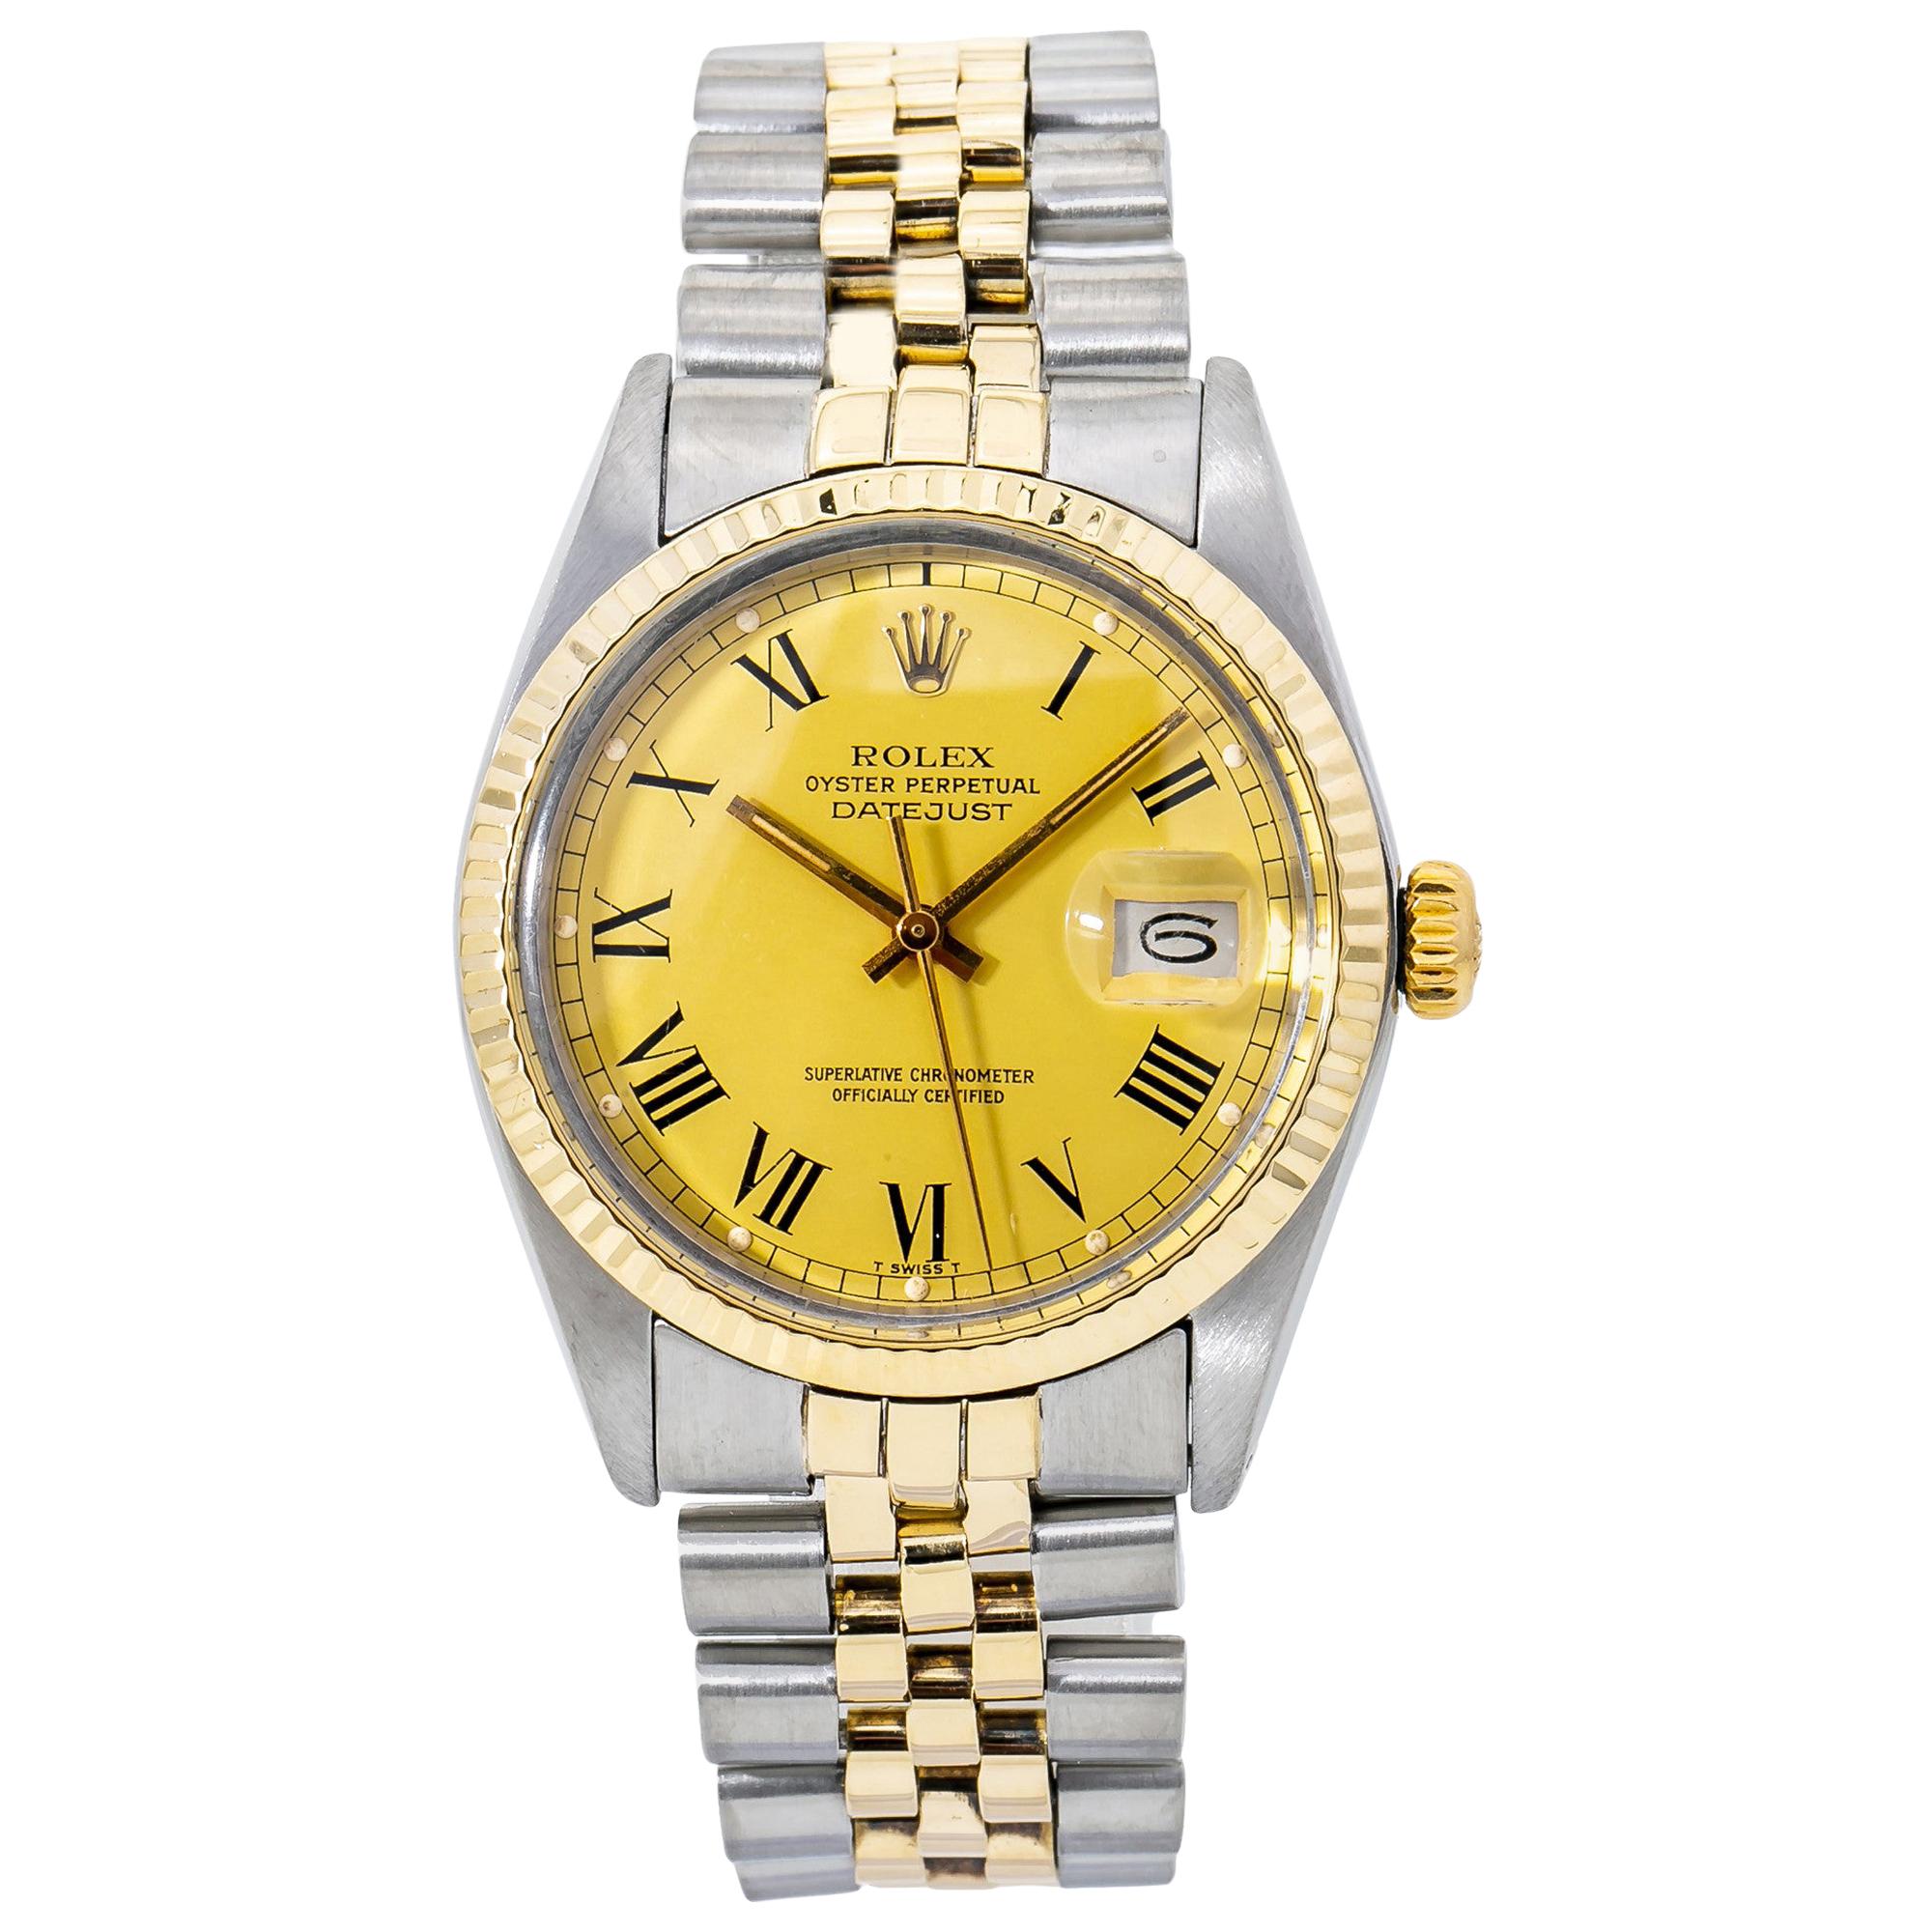 Rolex Datejust 16013, Champagne Dial, Certified and Warranty For Sale